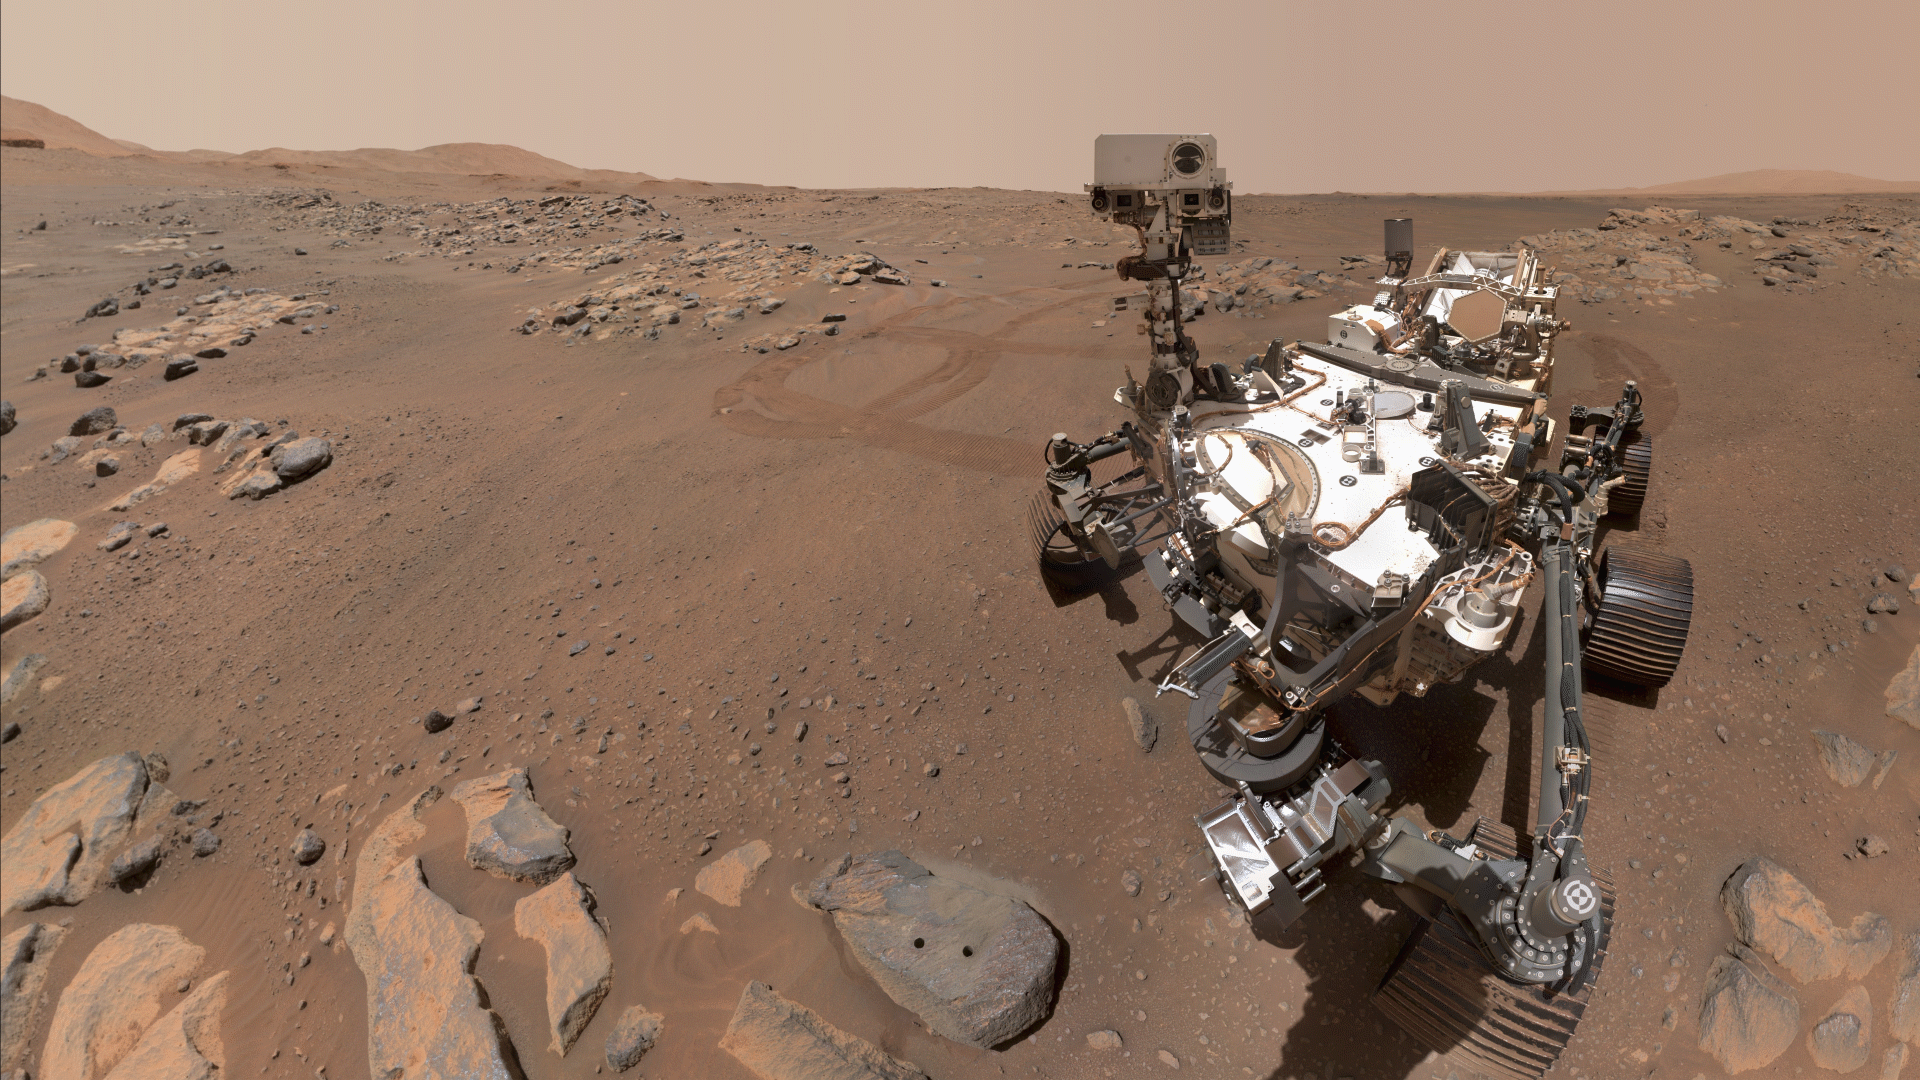 NASA's Perseverance rover took a selfie on Mars on Sept. 20, 2021.